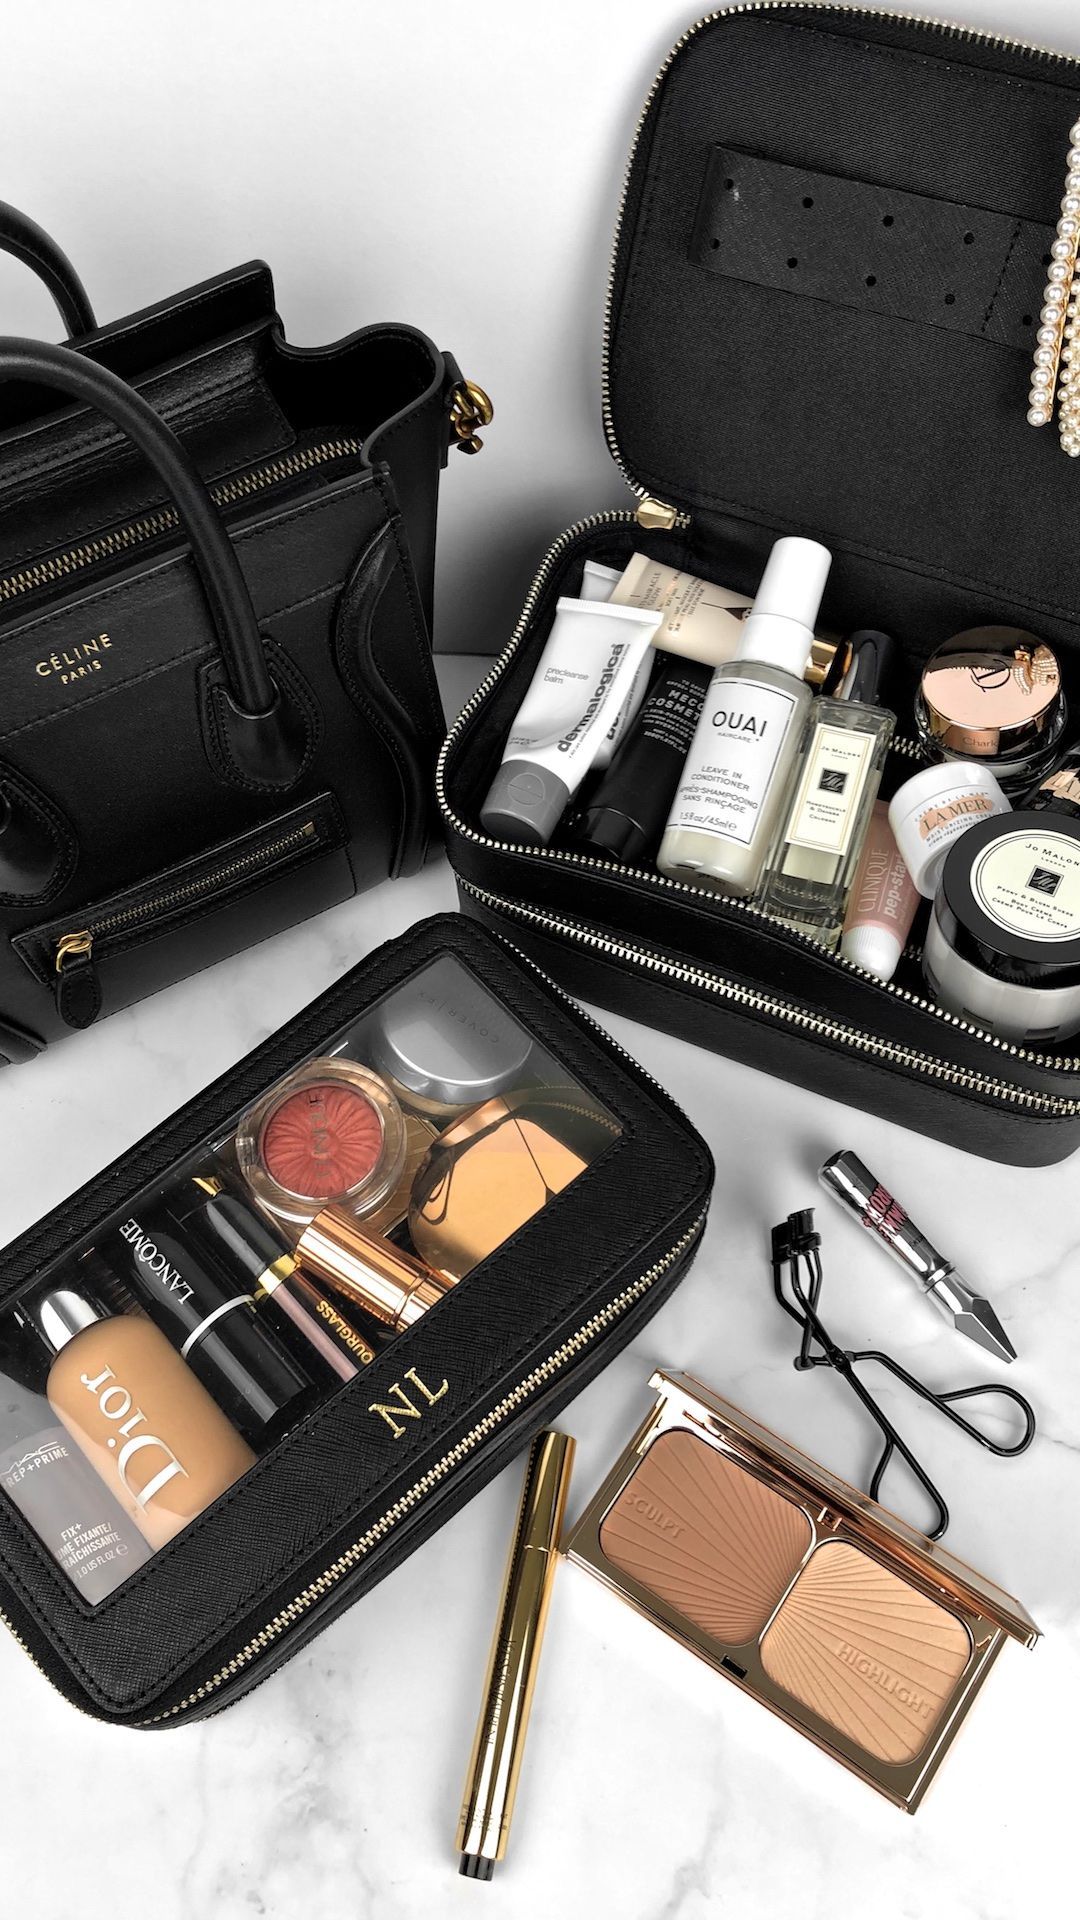 What's In My Travel Makeup Bag -   19 makeup Beauty products ideas